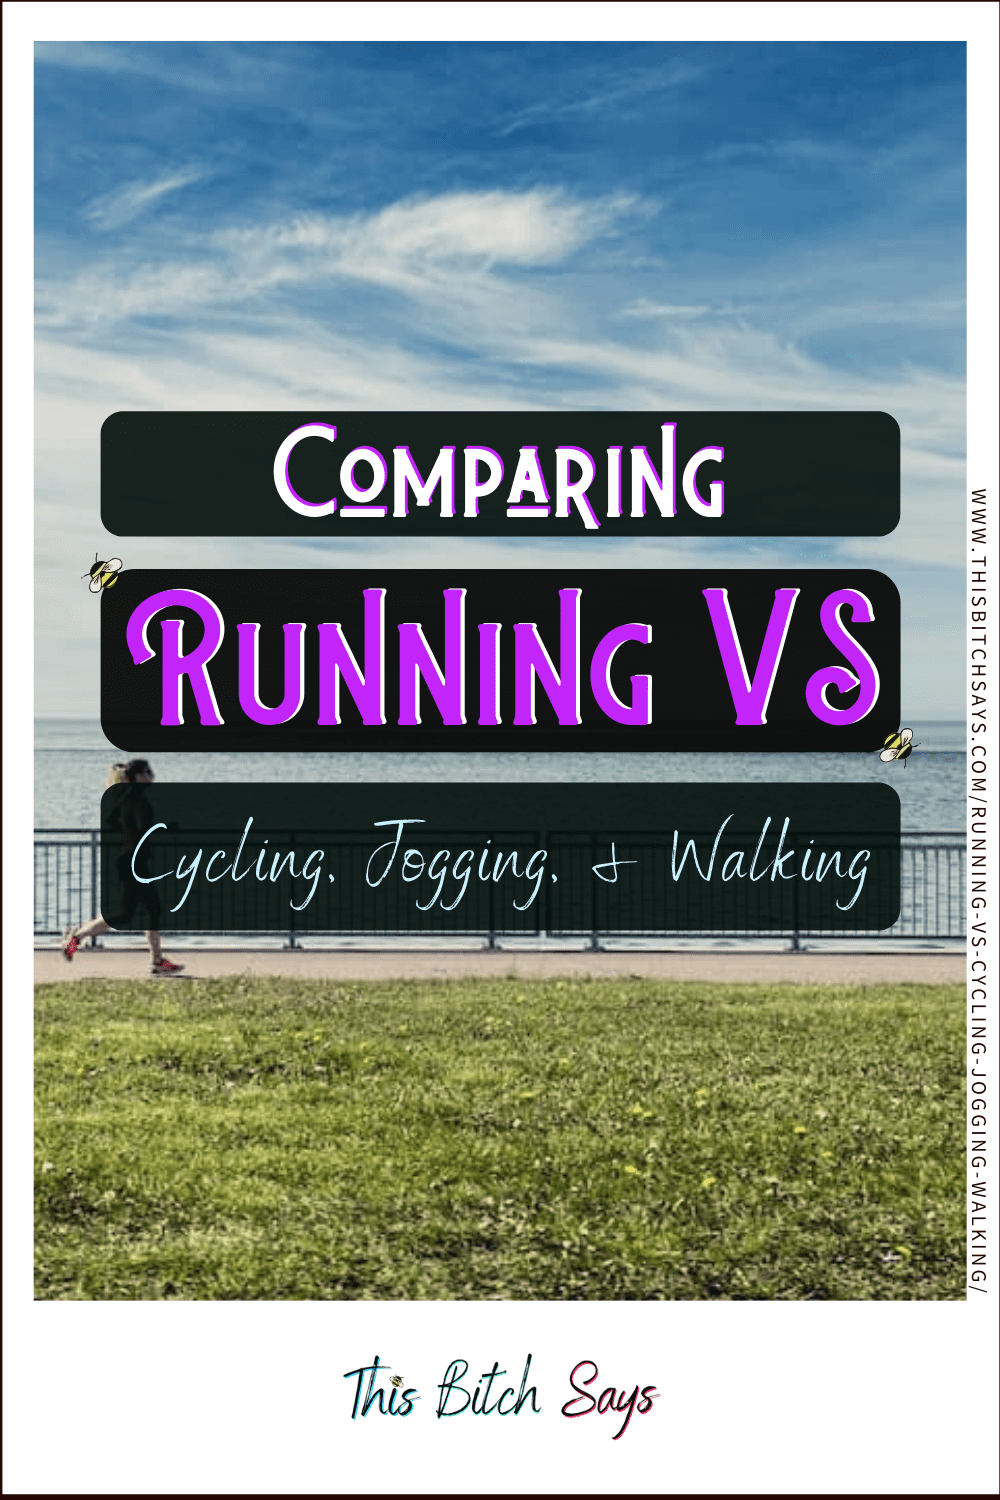 For Your Fitness: Comparing running vs cycling, jogging, and walking.